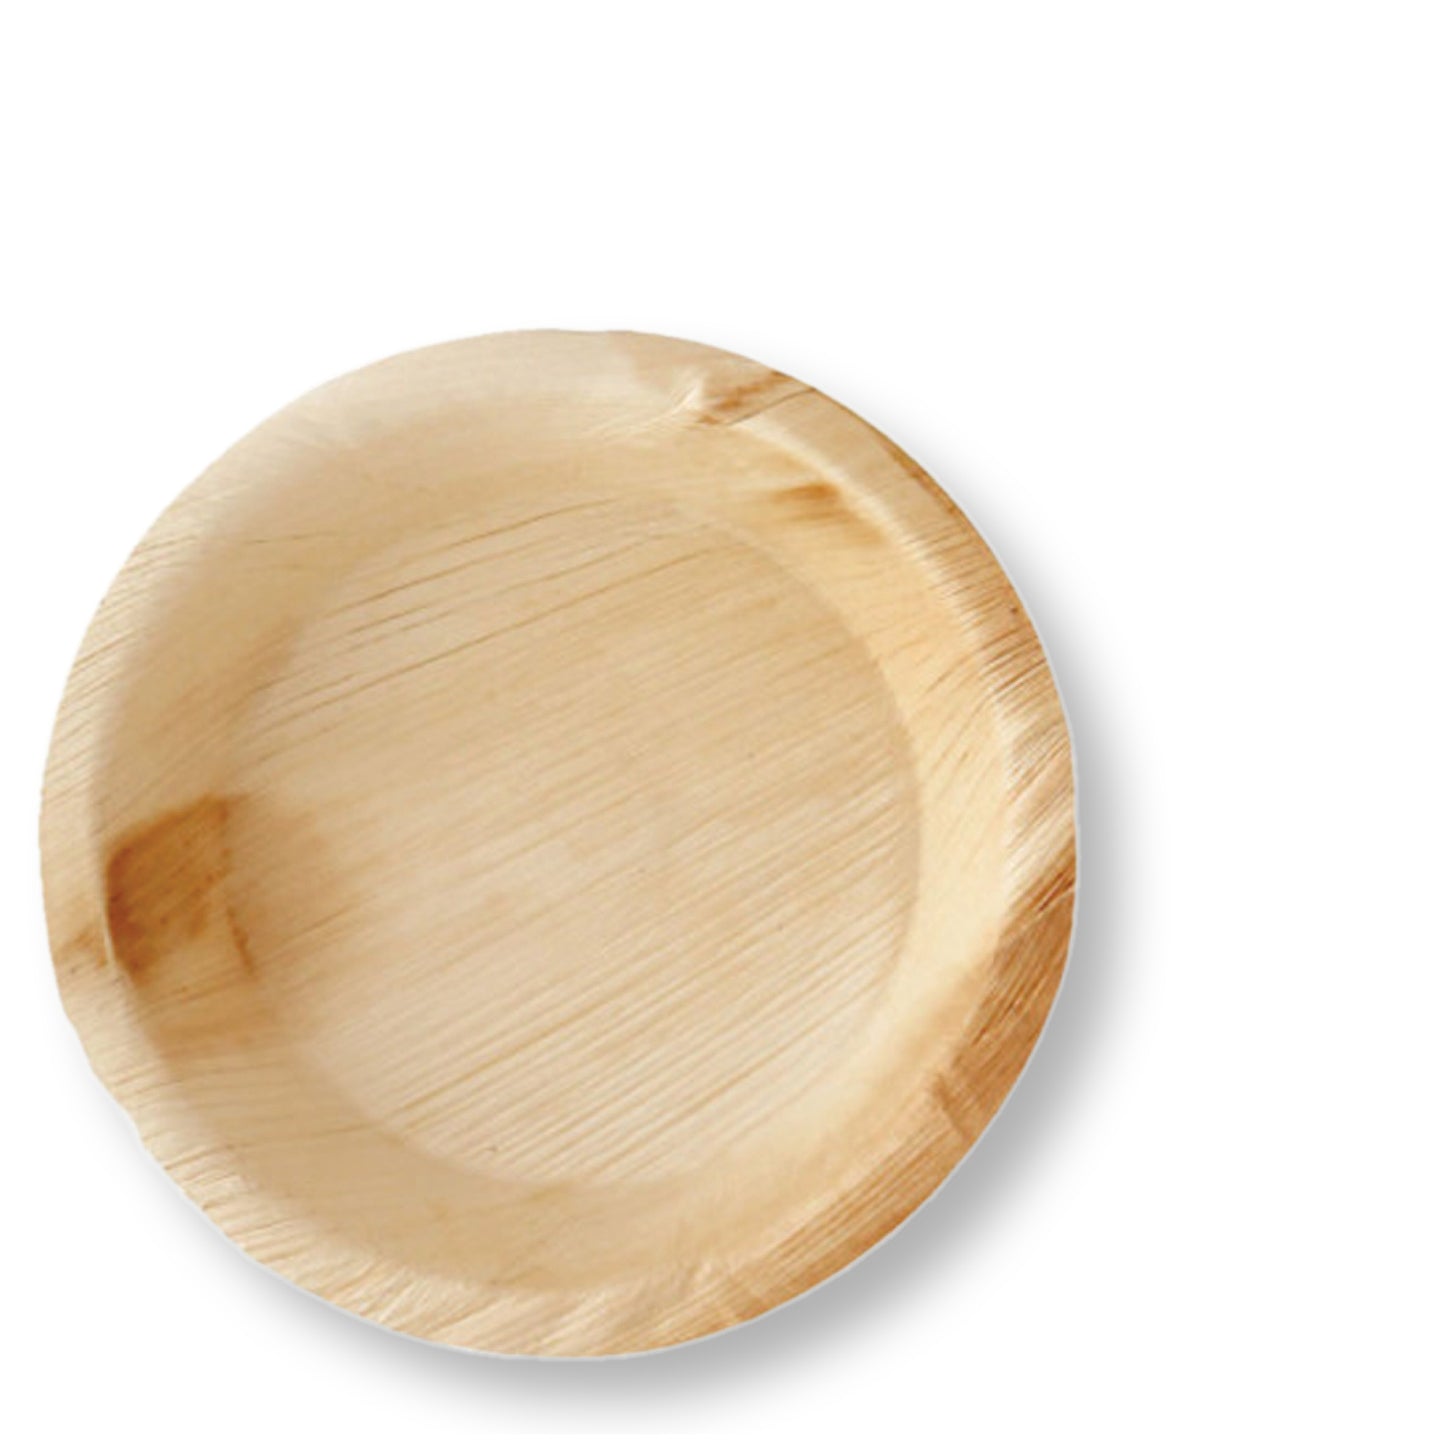 Disposable Stylish Palm Leaf Plates are a unique alternative to other disposable tableware on the market.  Chemical-free / Non-toxic• Biodegradable / Compostable• Microwave Safe• Oven Safe• Refrigerator safe